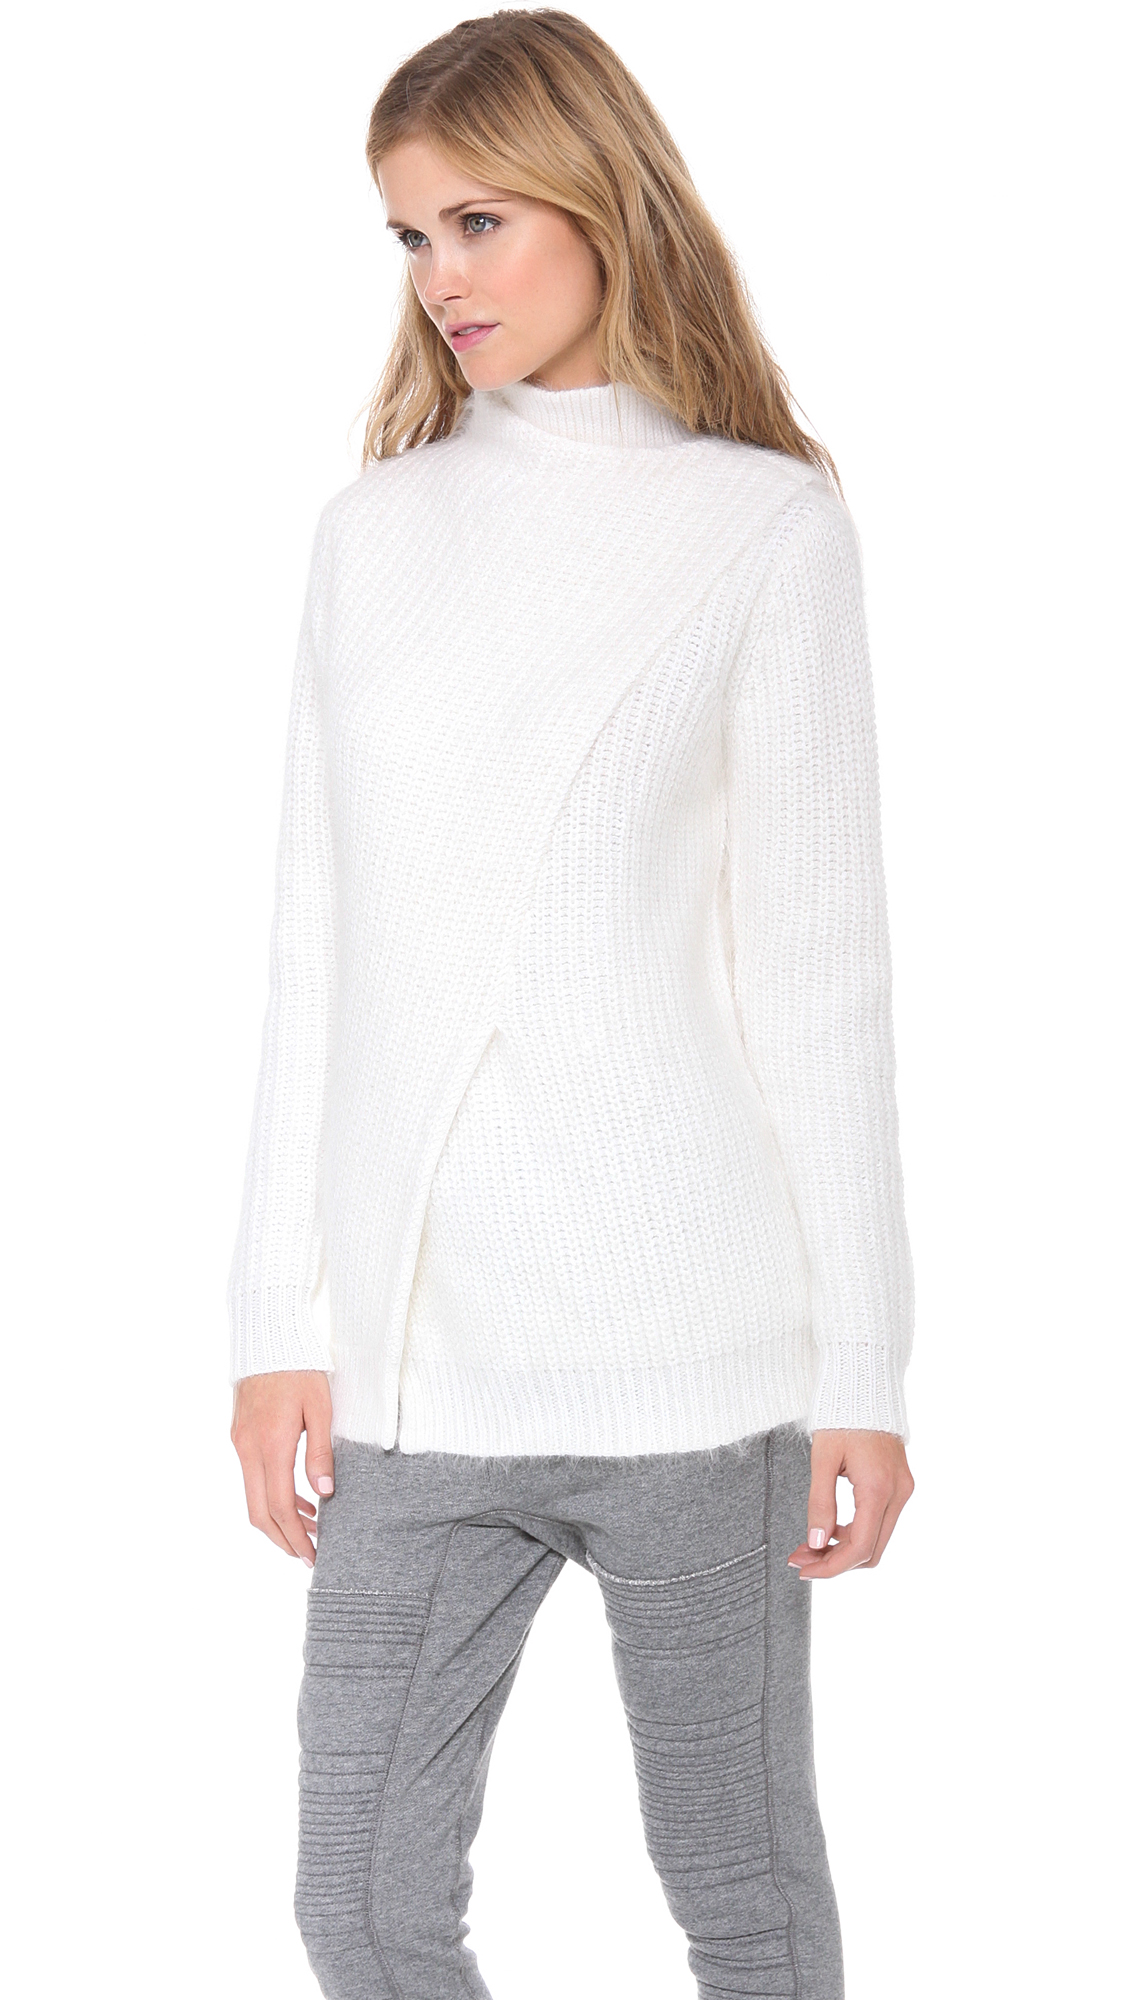 Lyst - 3.1 Phillip Lim Wrap Sweater with Open Back in White